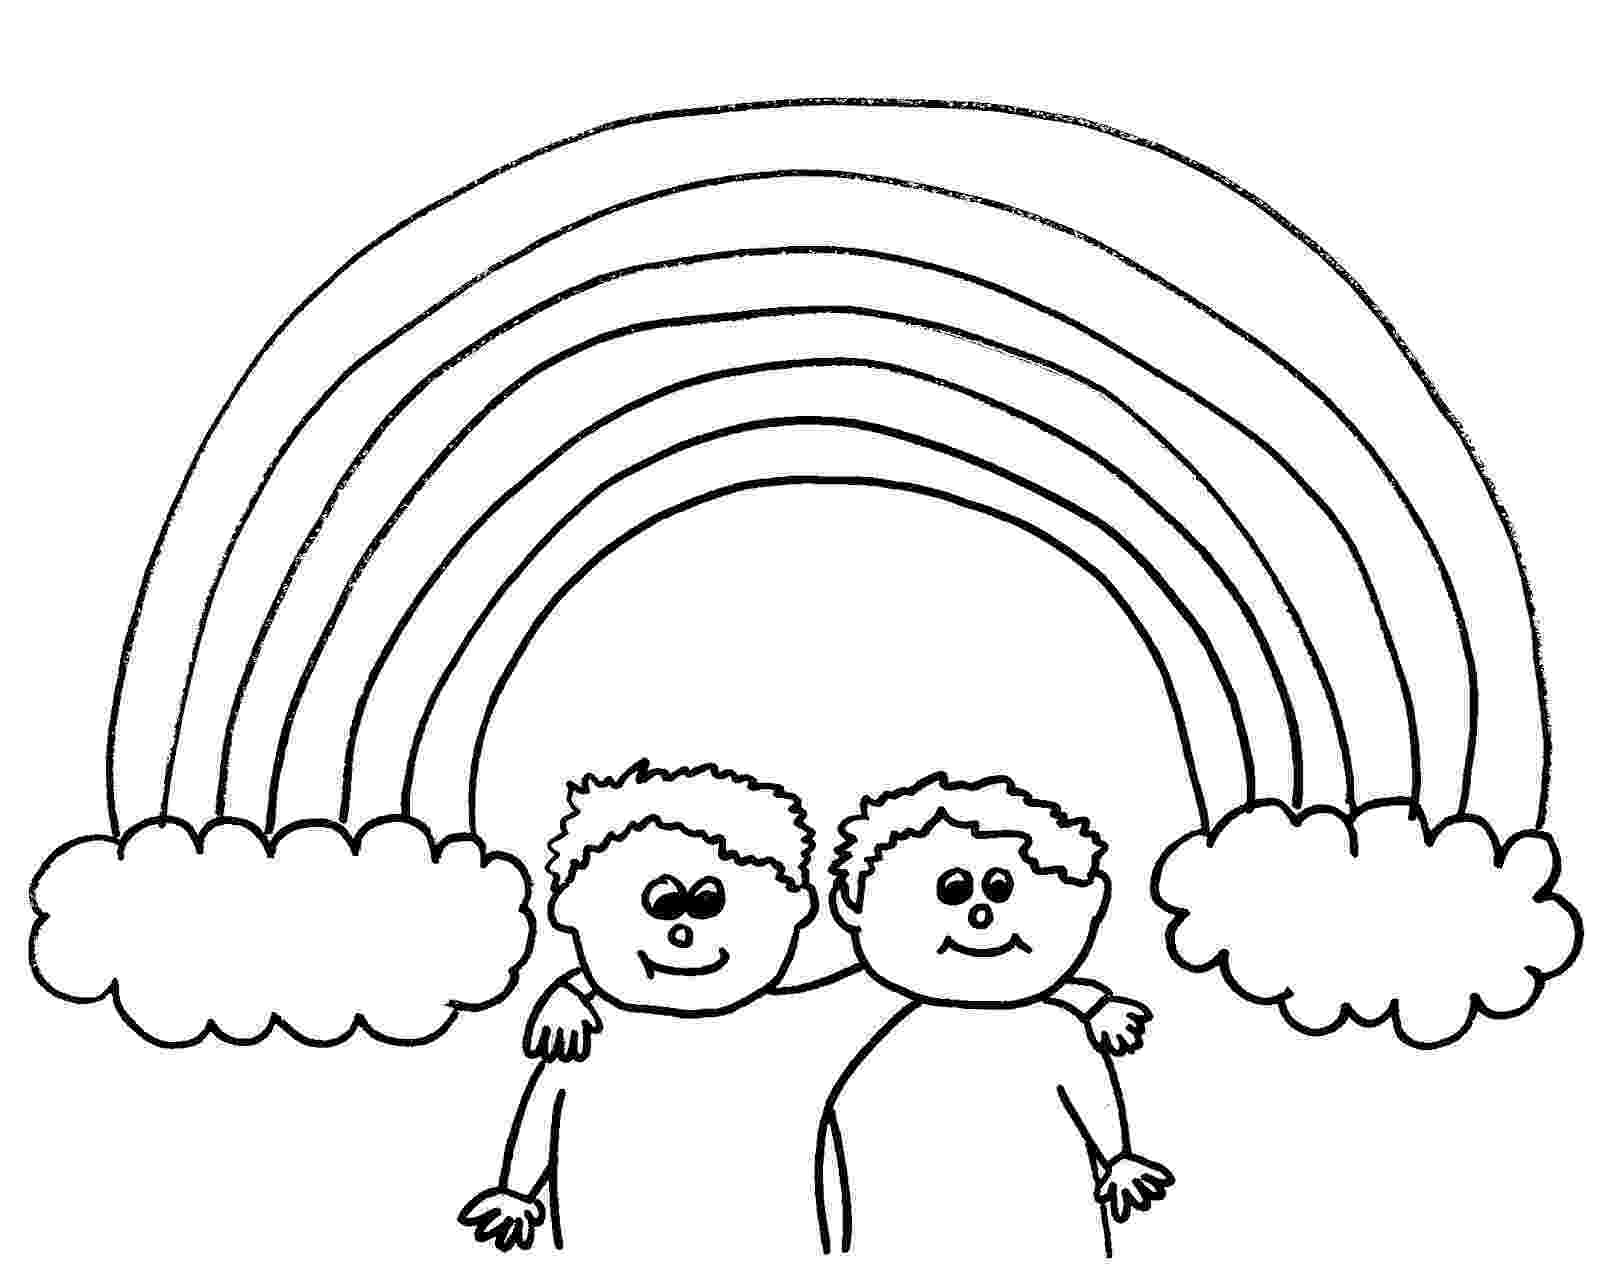 coloring pages rainbow rainbow coloring pages for childrens printable for free rainbow coloring pages 